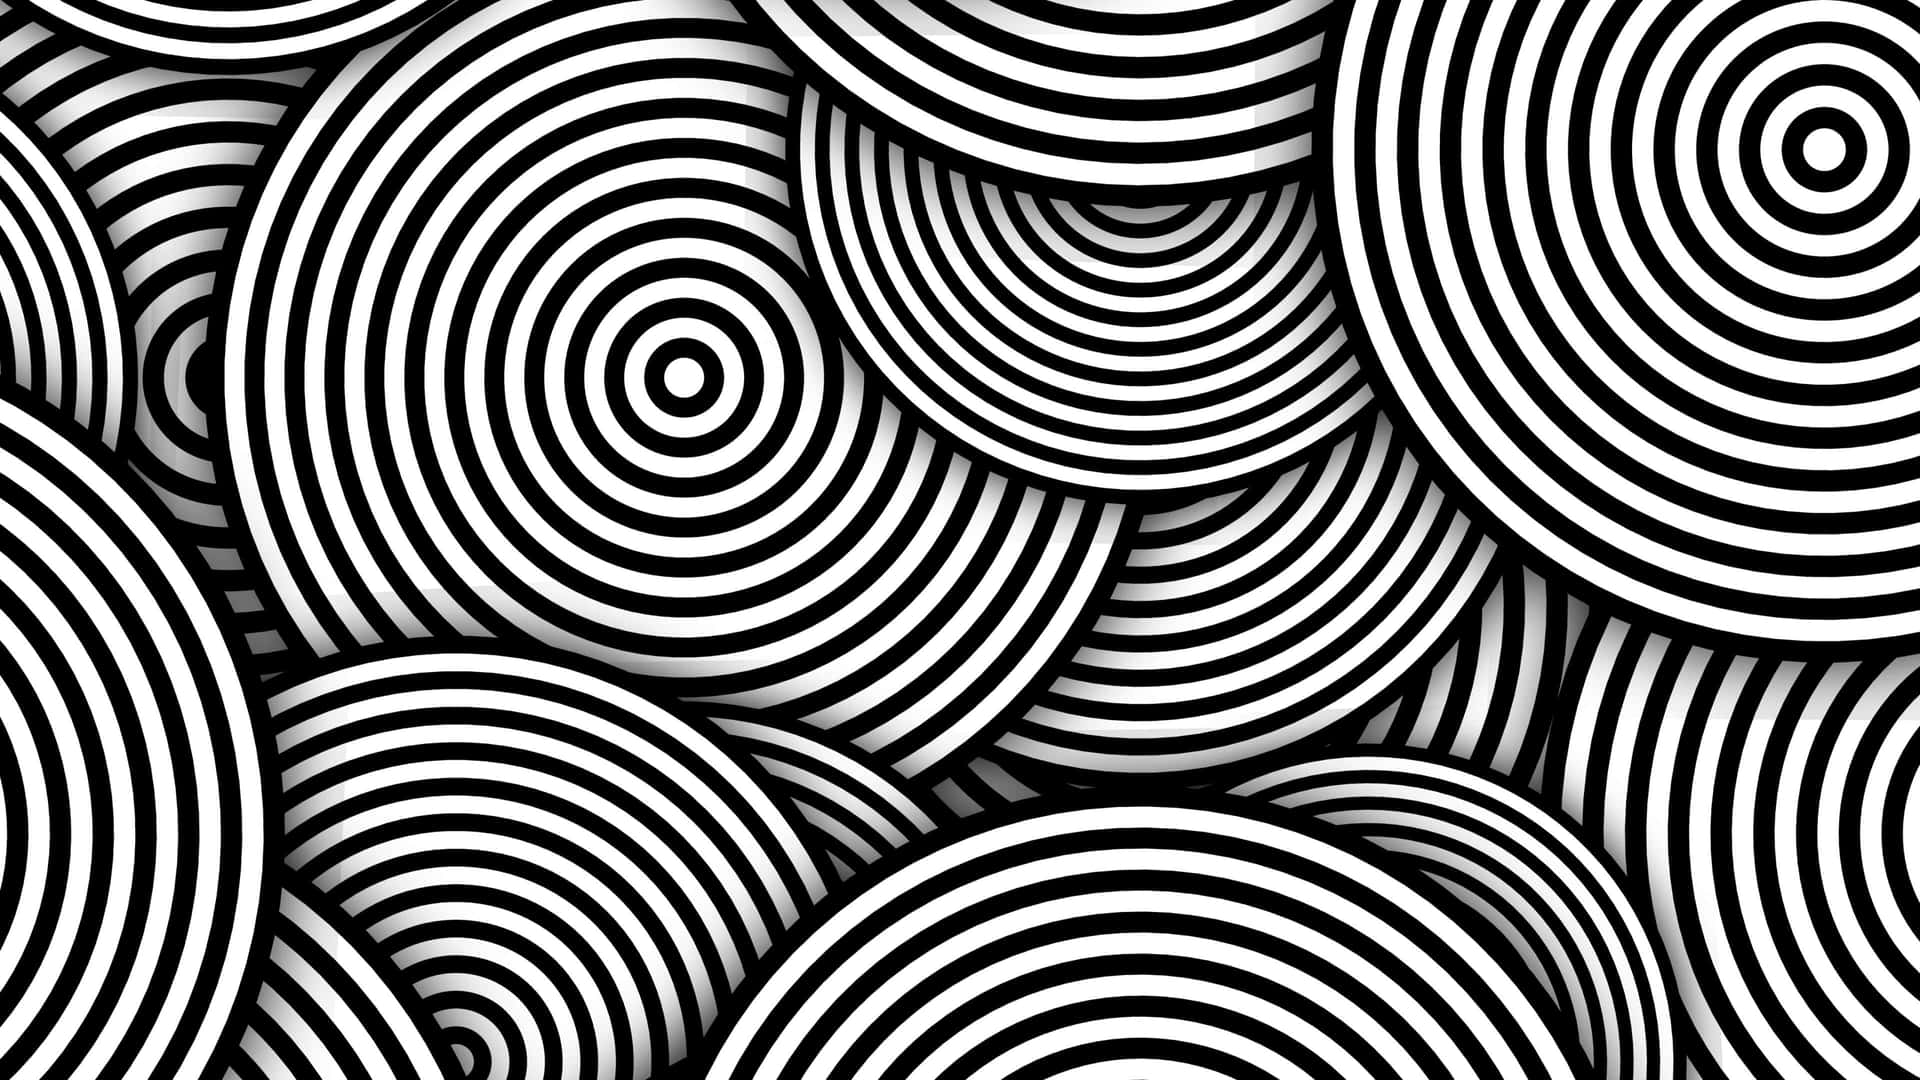 Abstract Black And White Concentric Circles Pattern Wallpaper